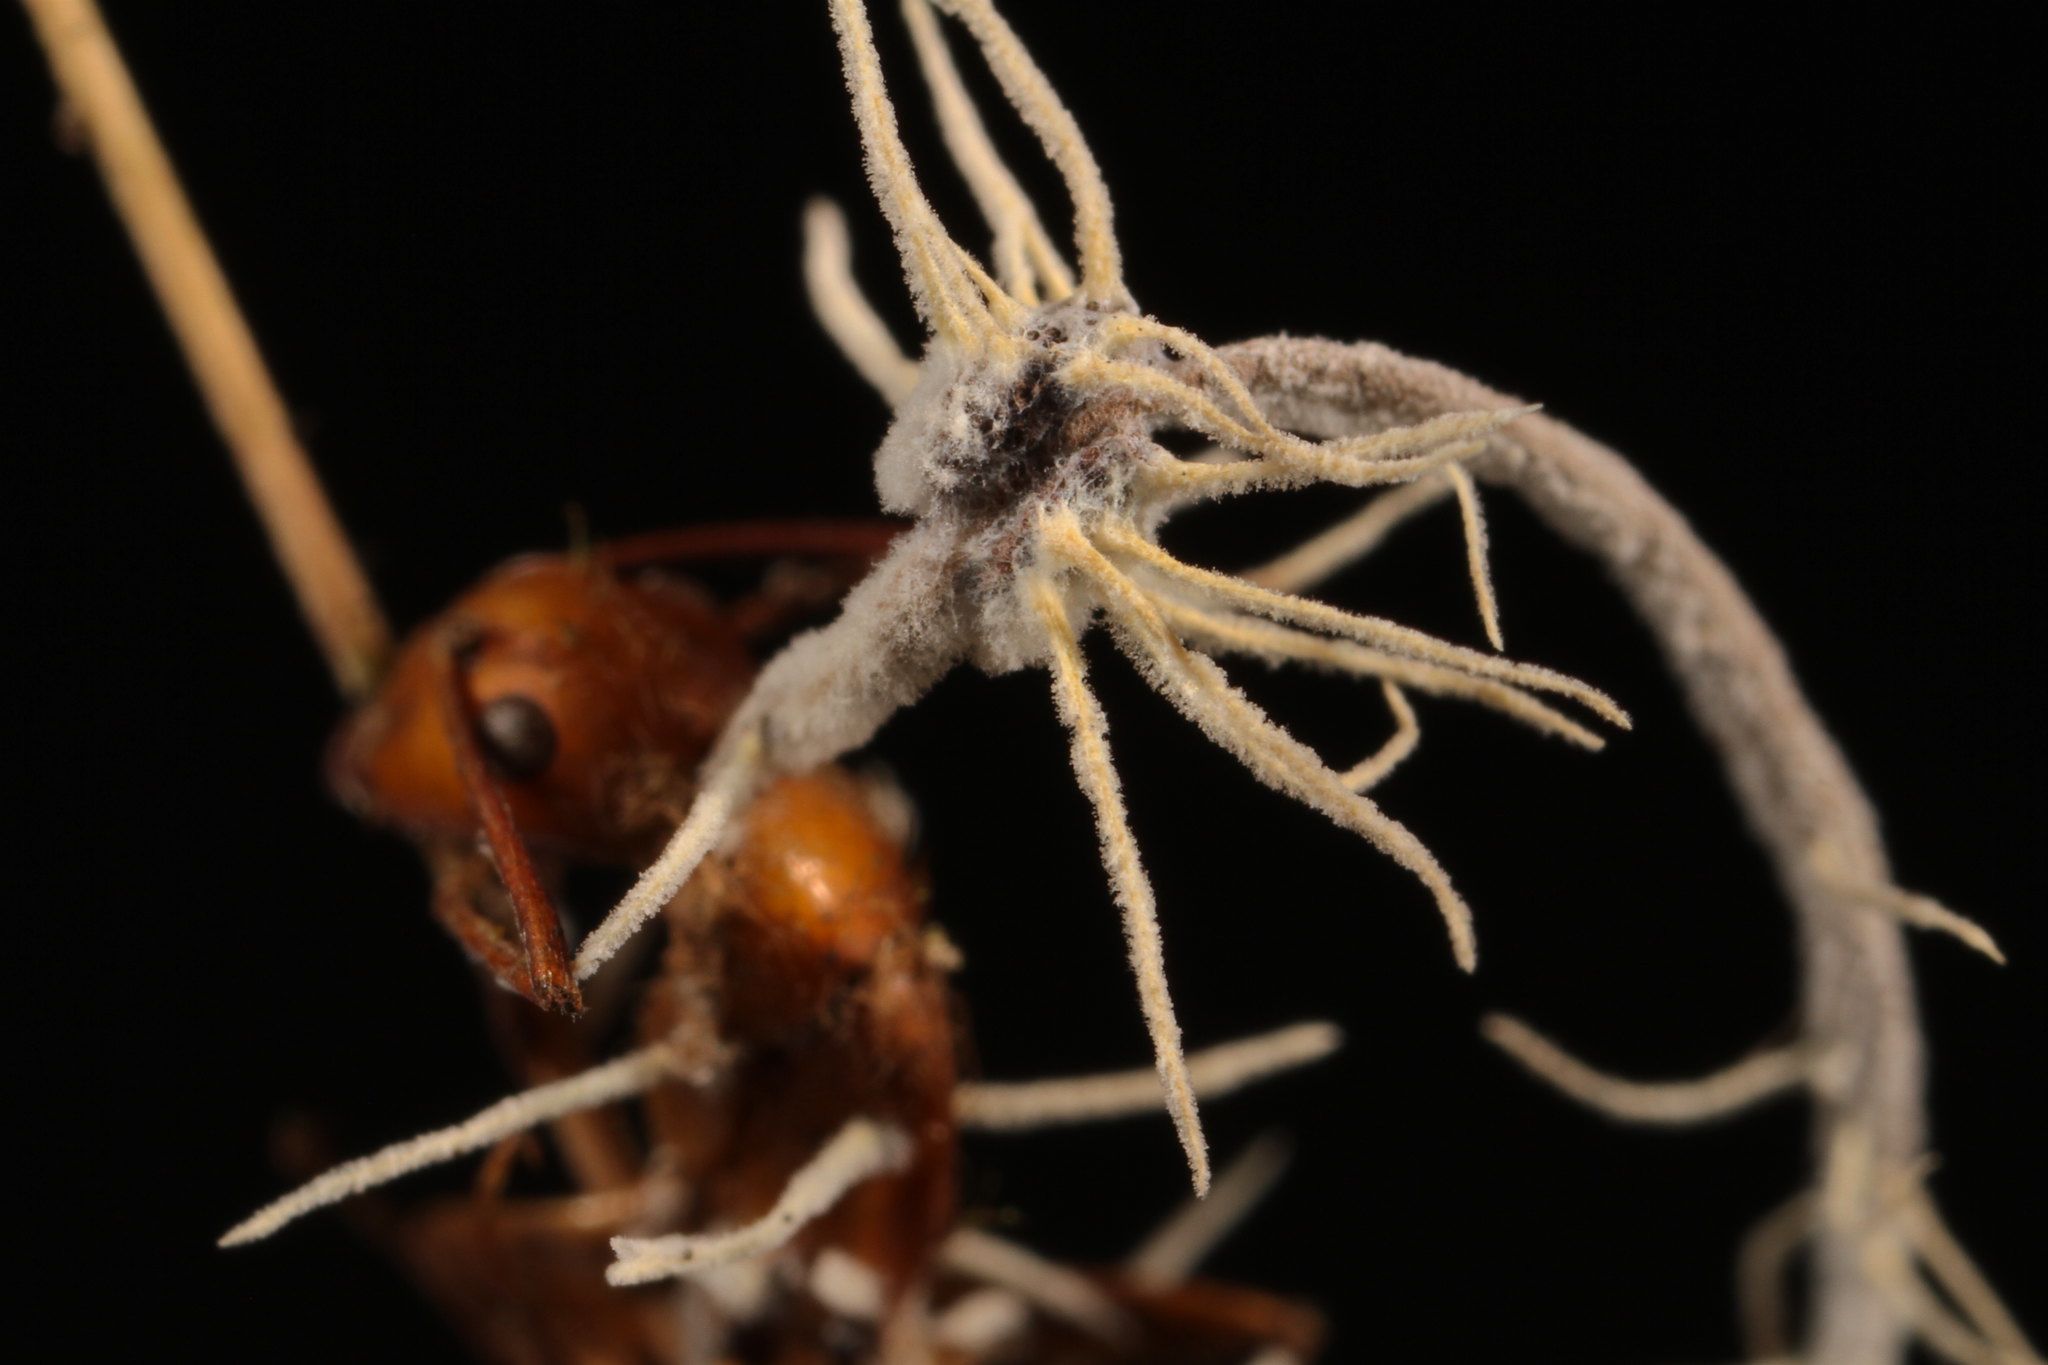 Zombie ant' fungi infected with parasites of their own | CNN